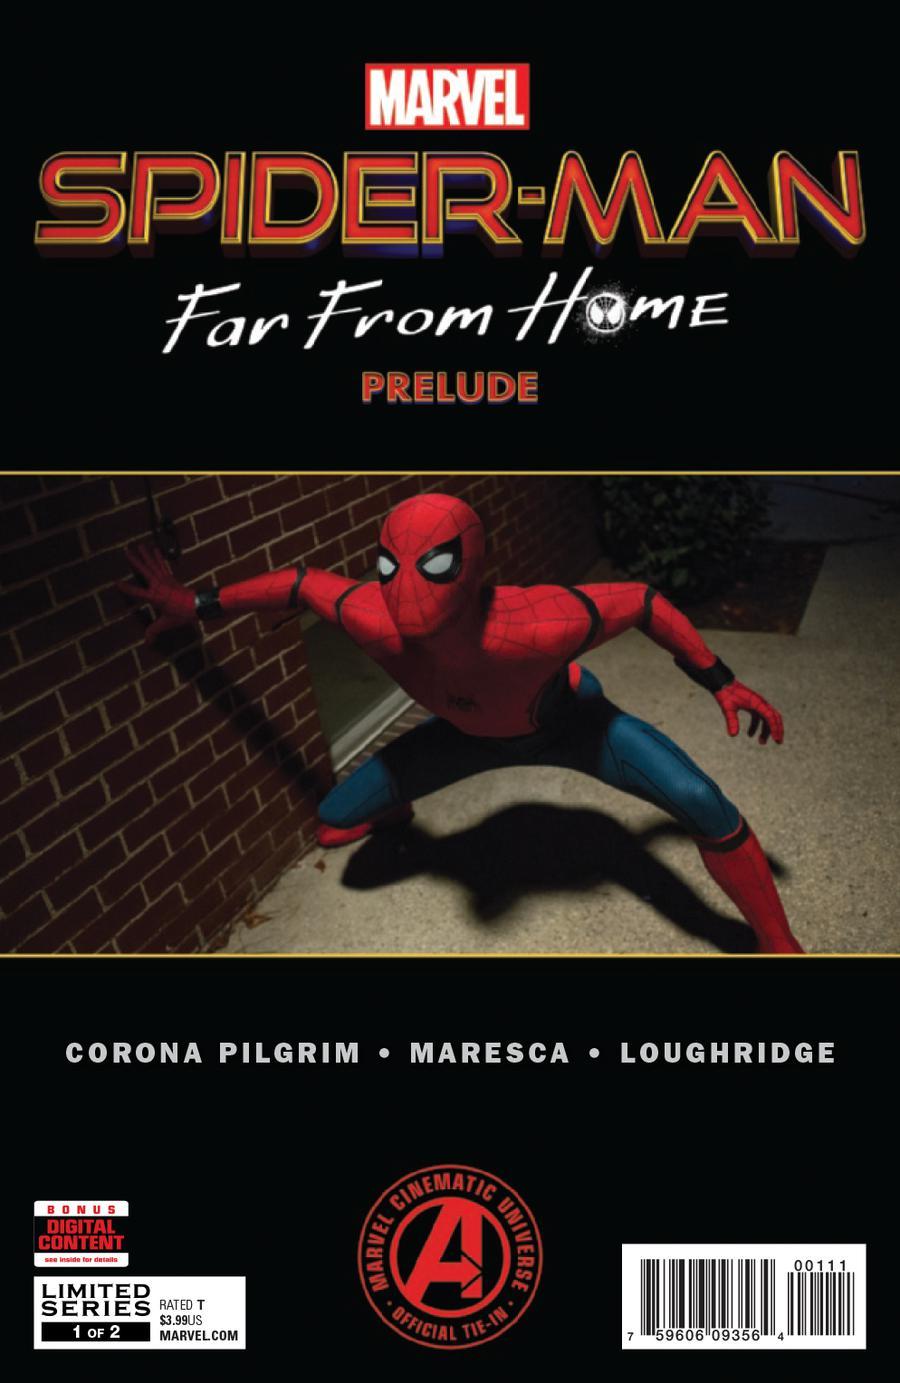 Marvels Spider-Man Far From Home Prelude Vol. 1 #1